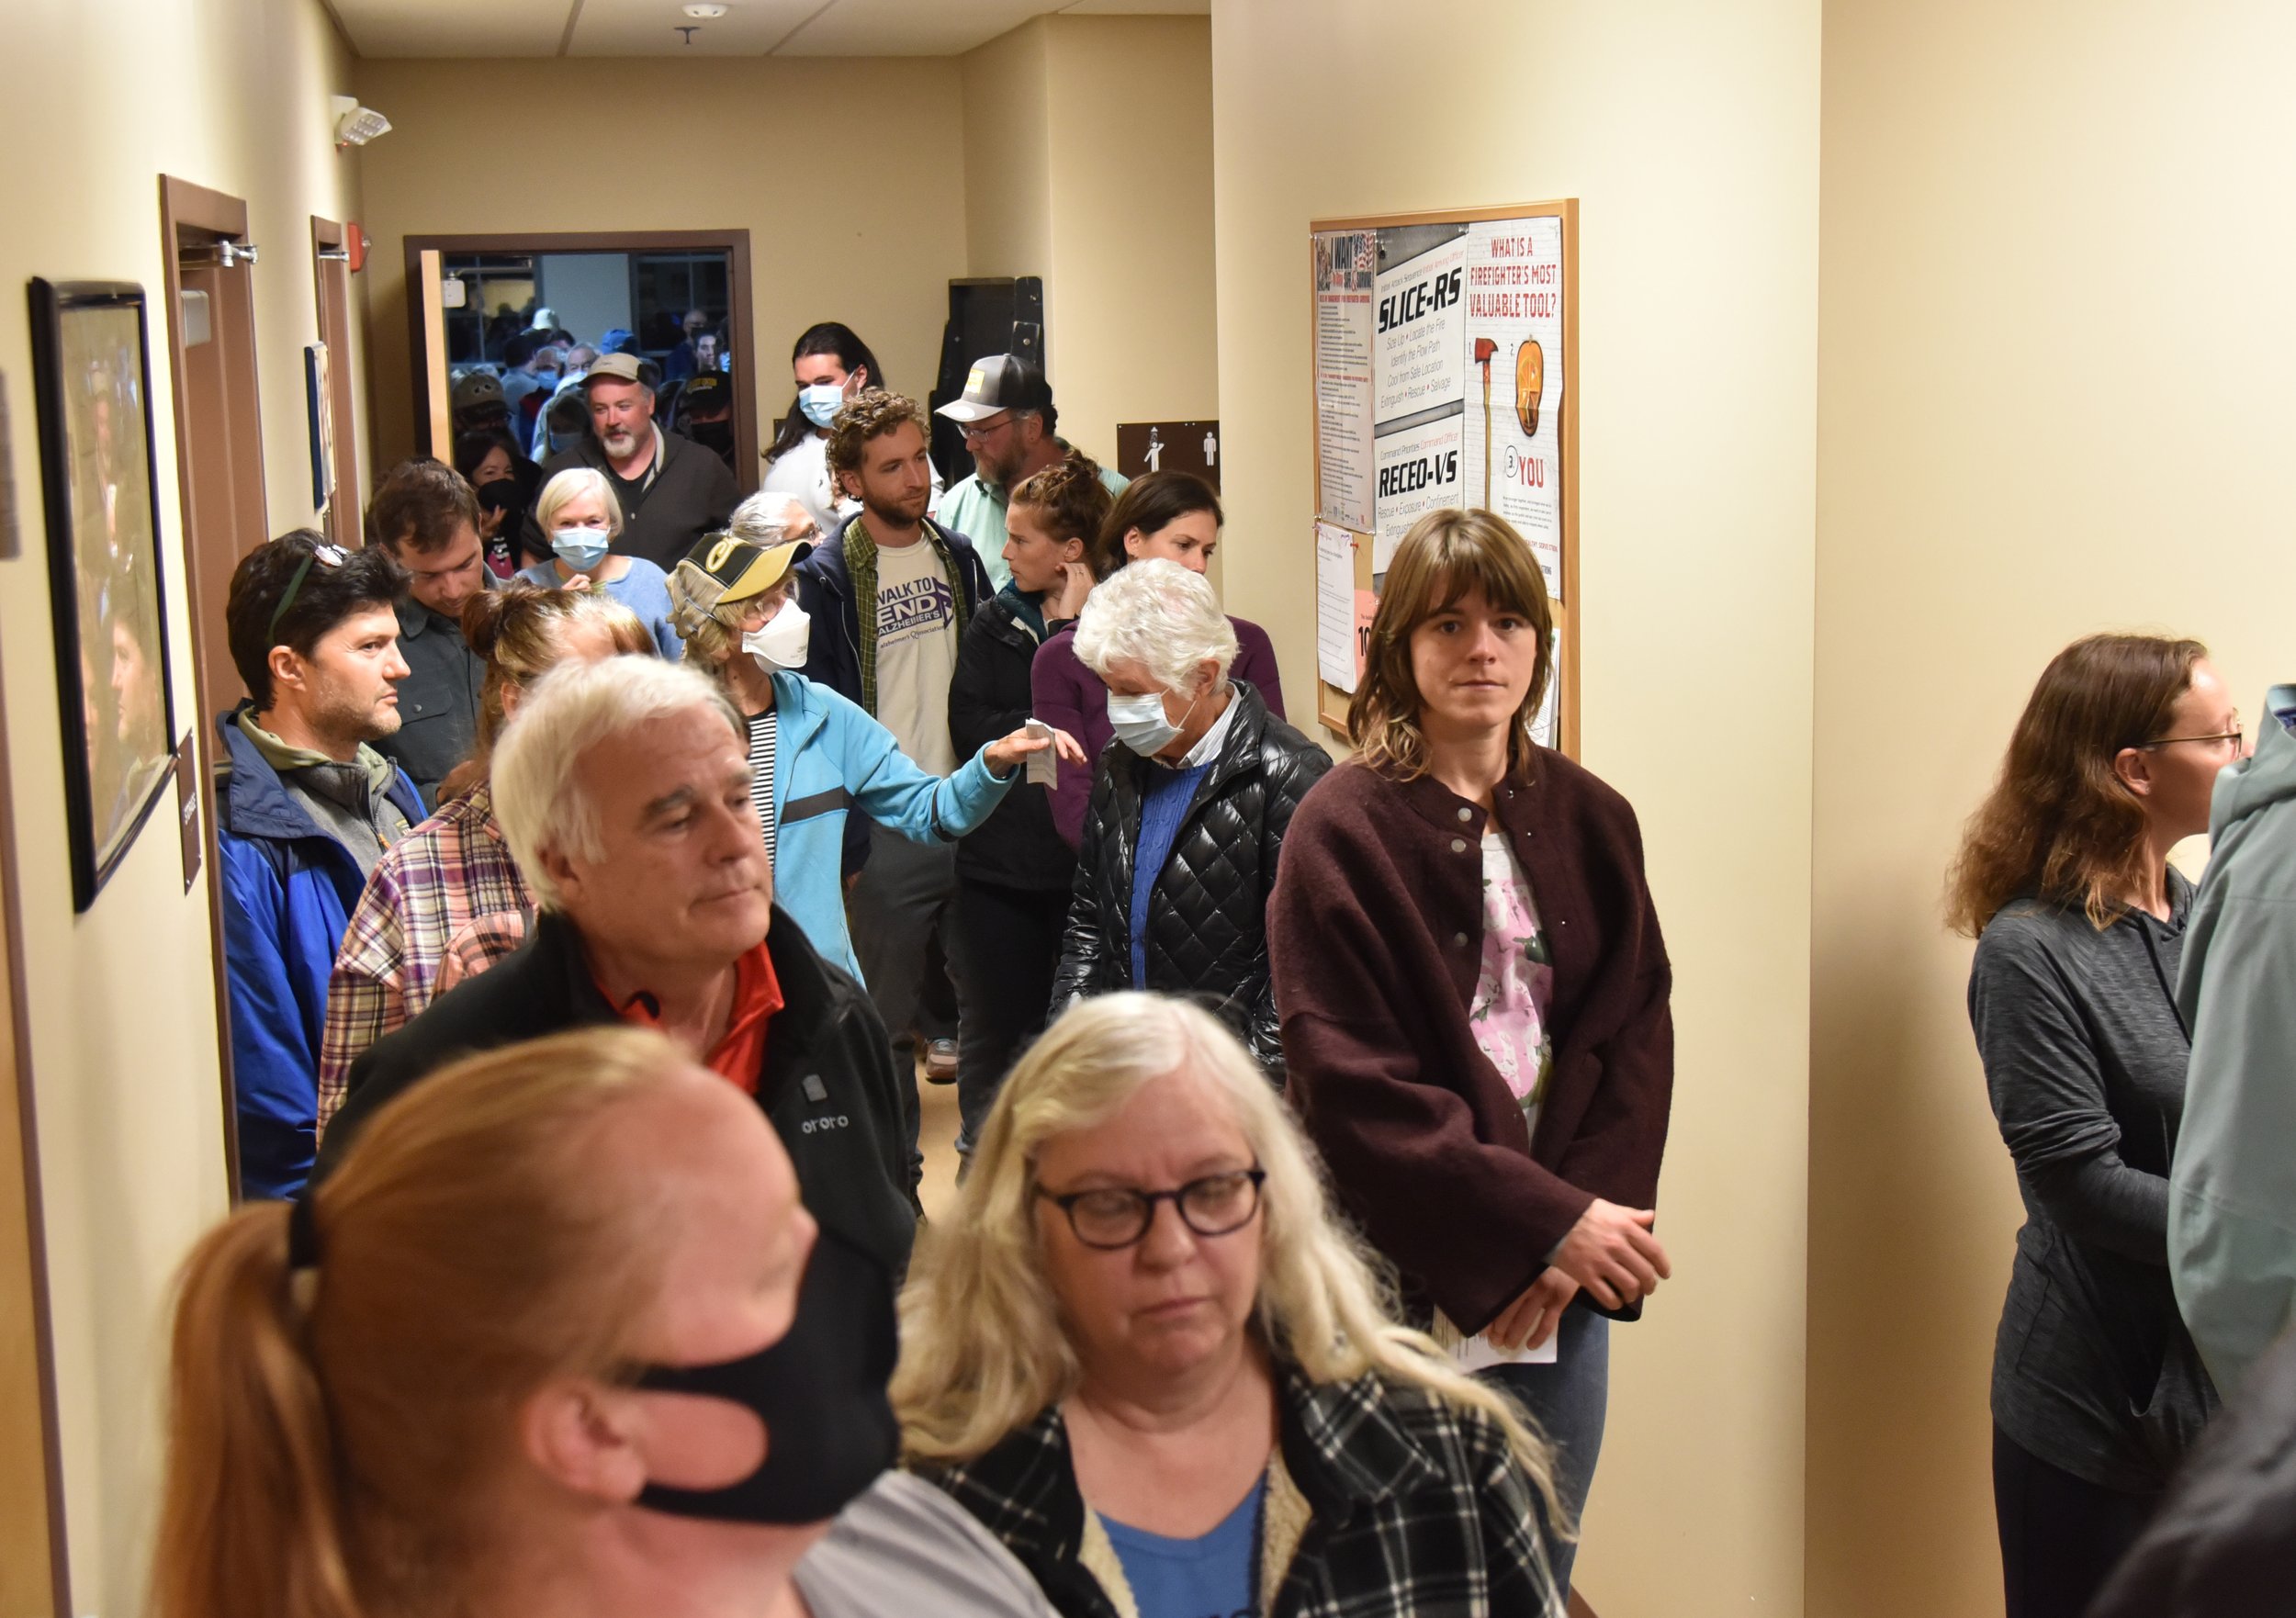   People exited the meeting room in one direction and returned through another door. Photo by Gordon Miller  